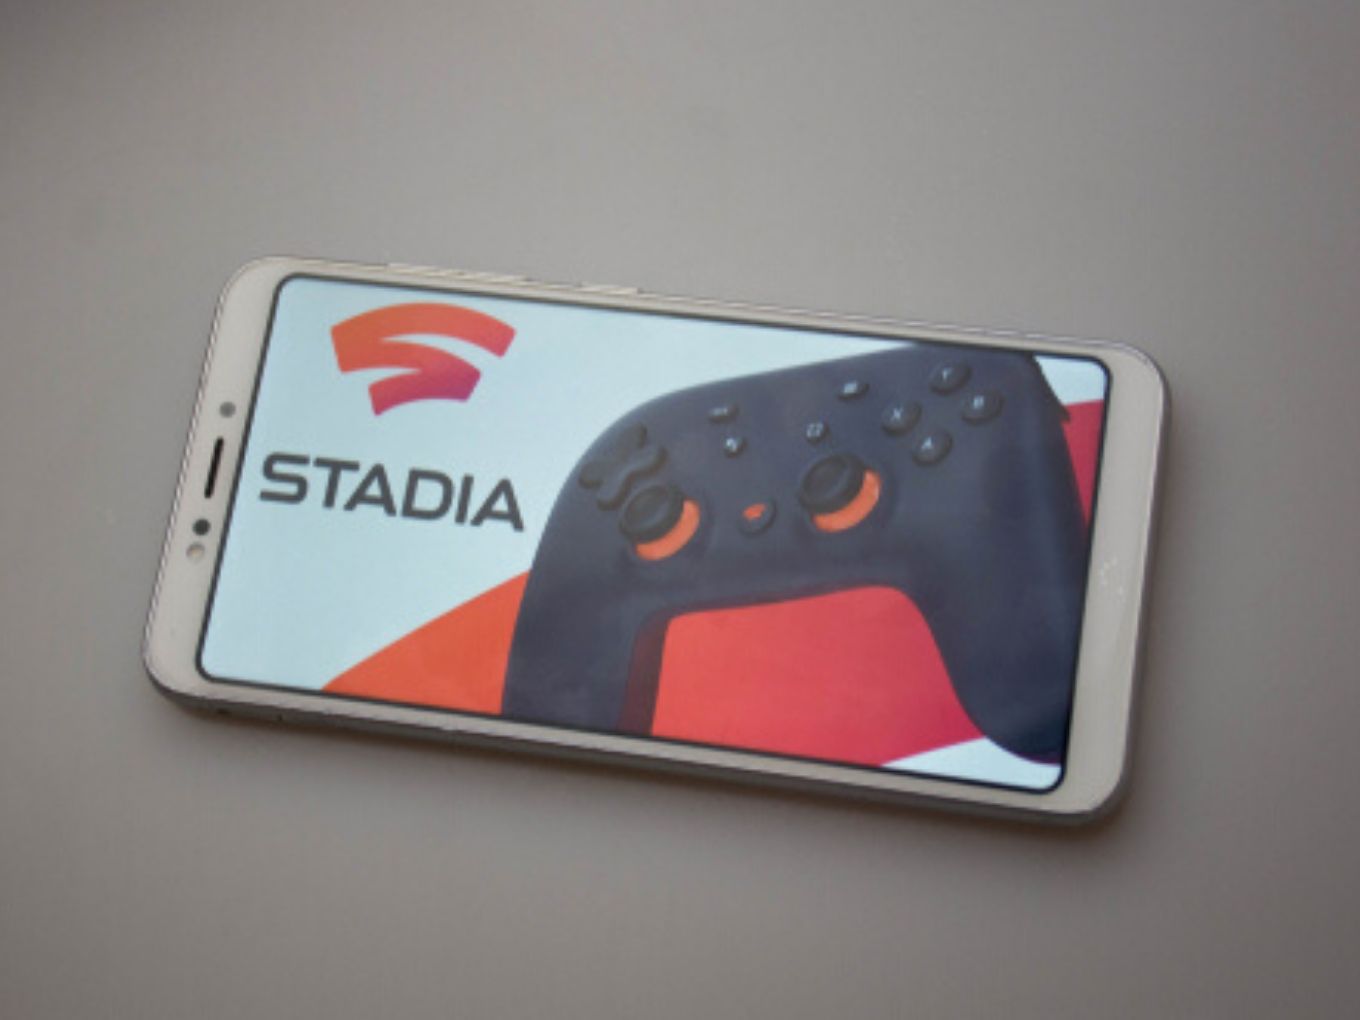 Google Stadia: Video game cloud streaming service launches Tuesday